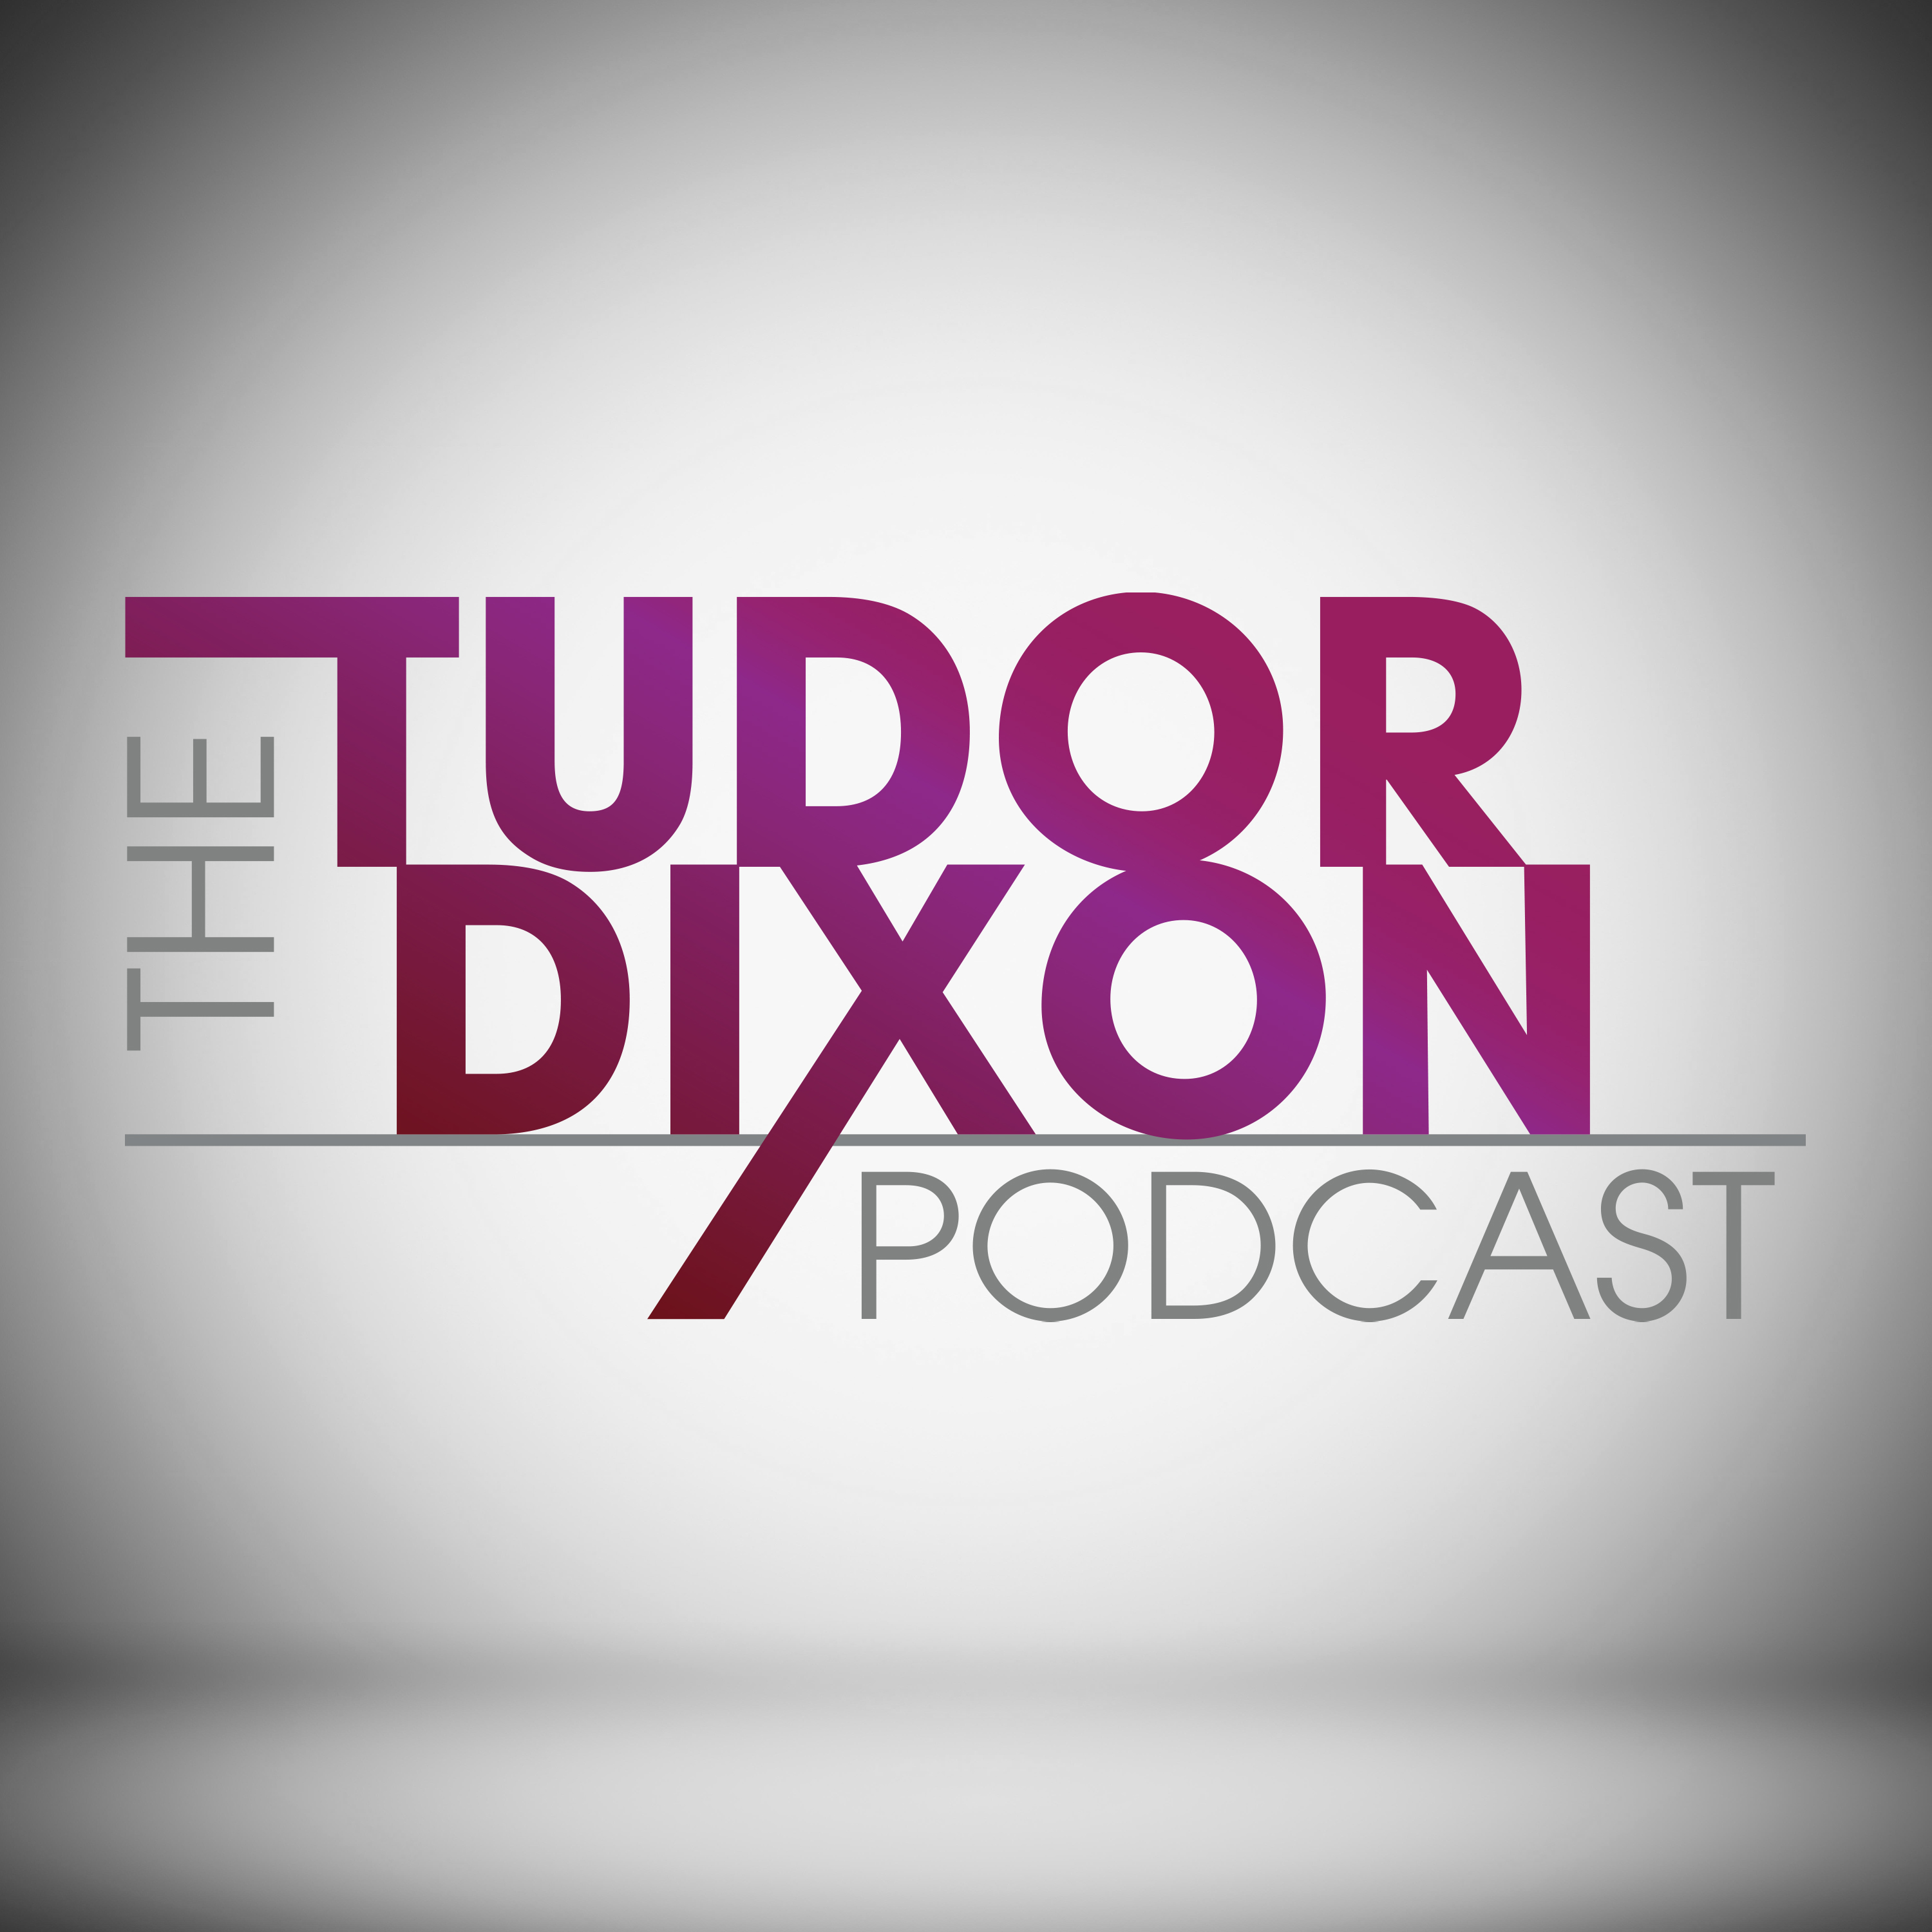 The Tudor Dixon Podcast: Superpower in Peril with Dave McCormick